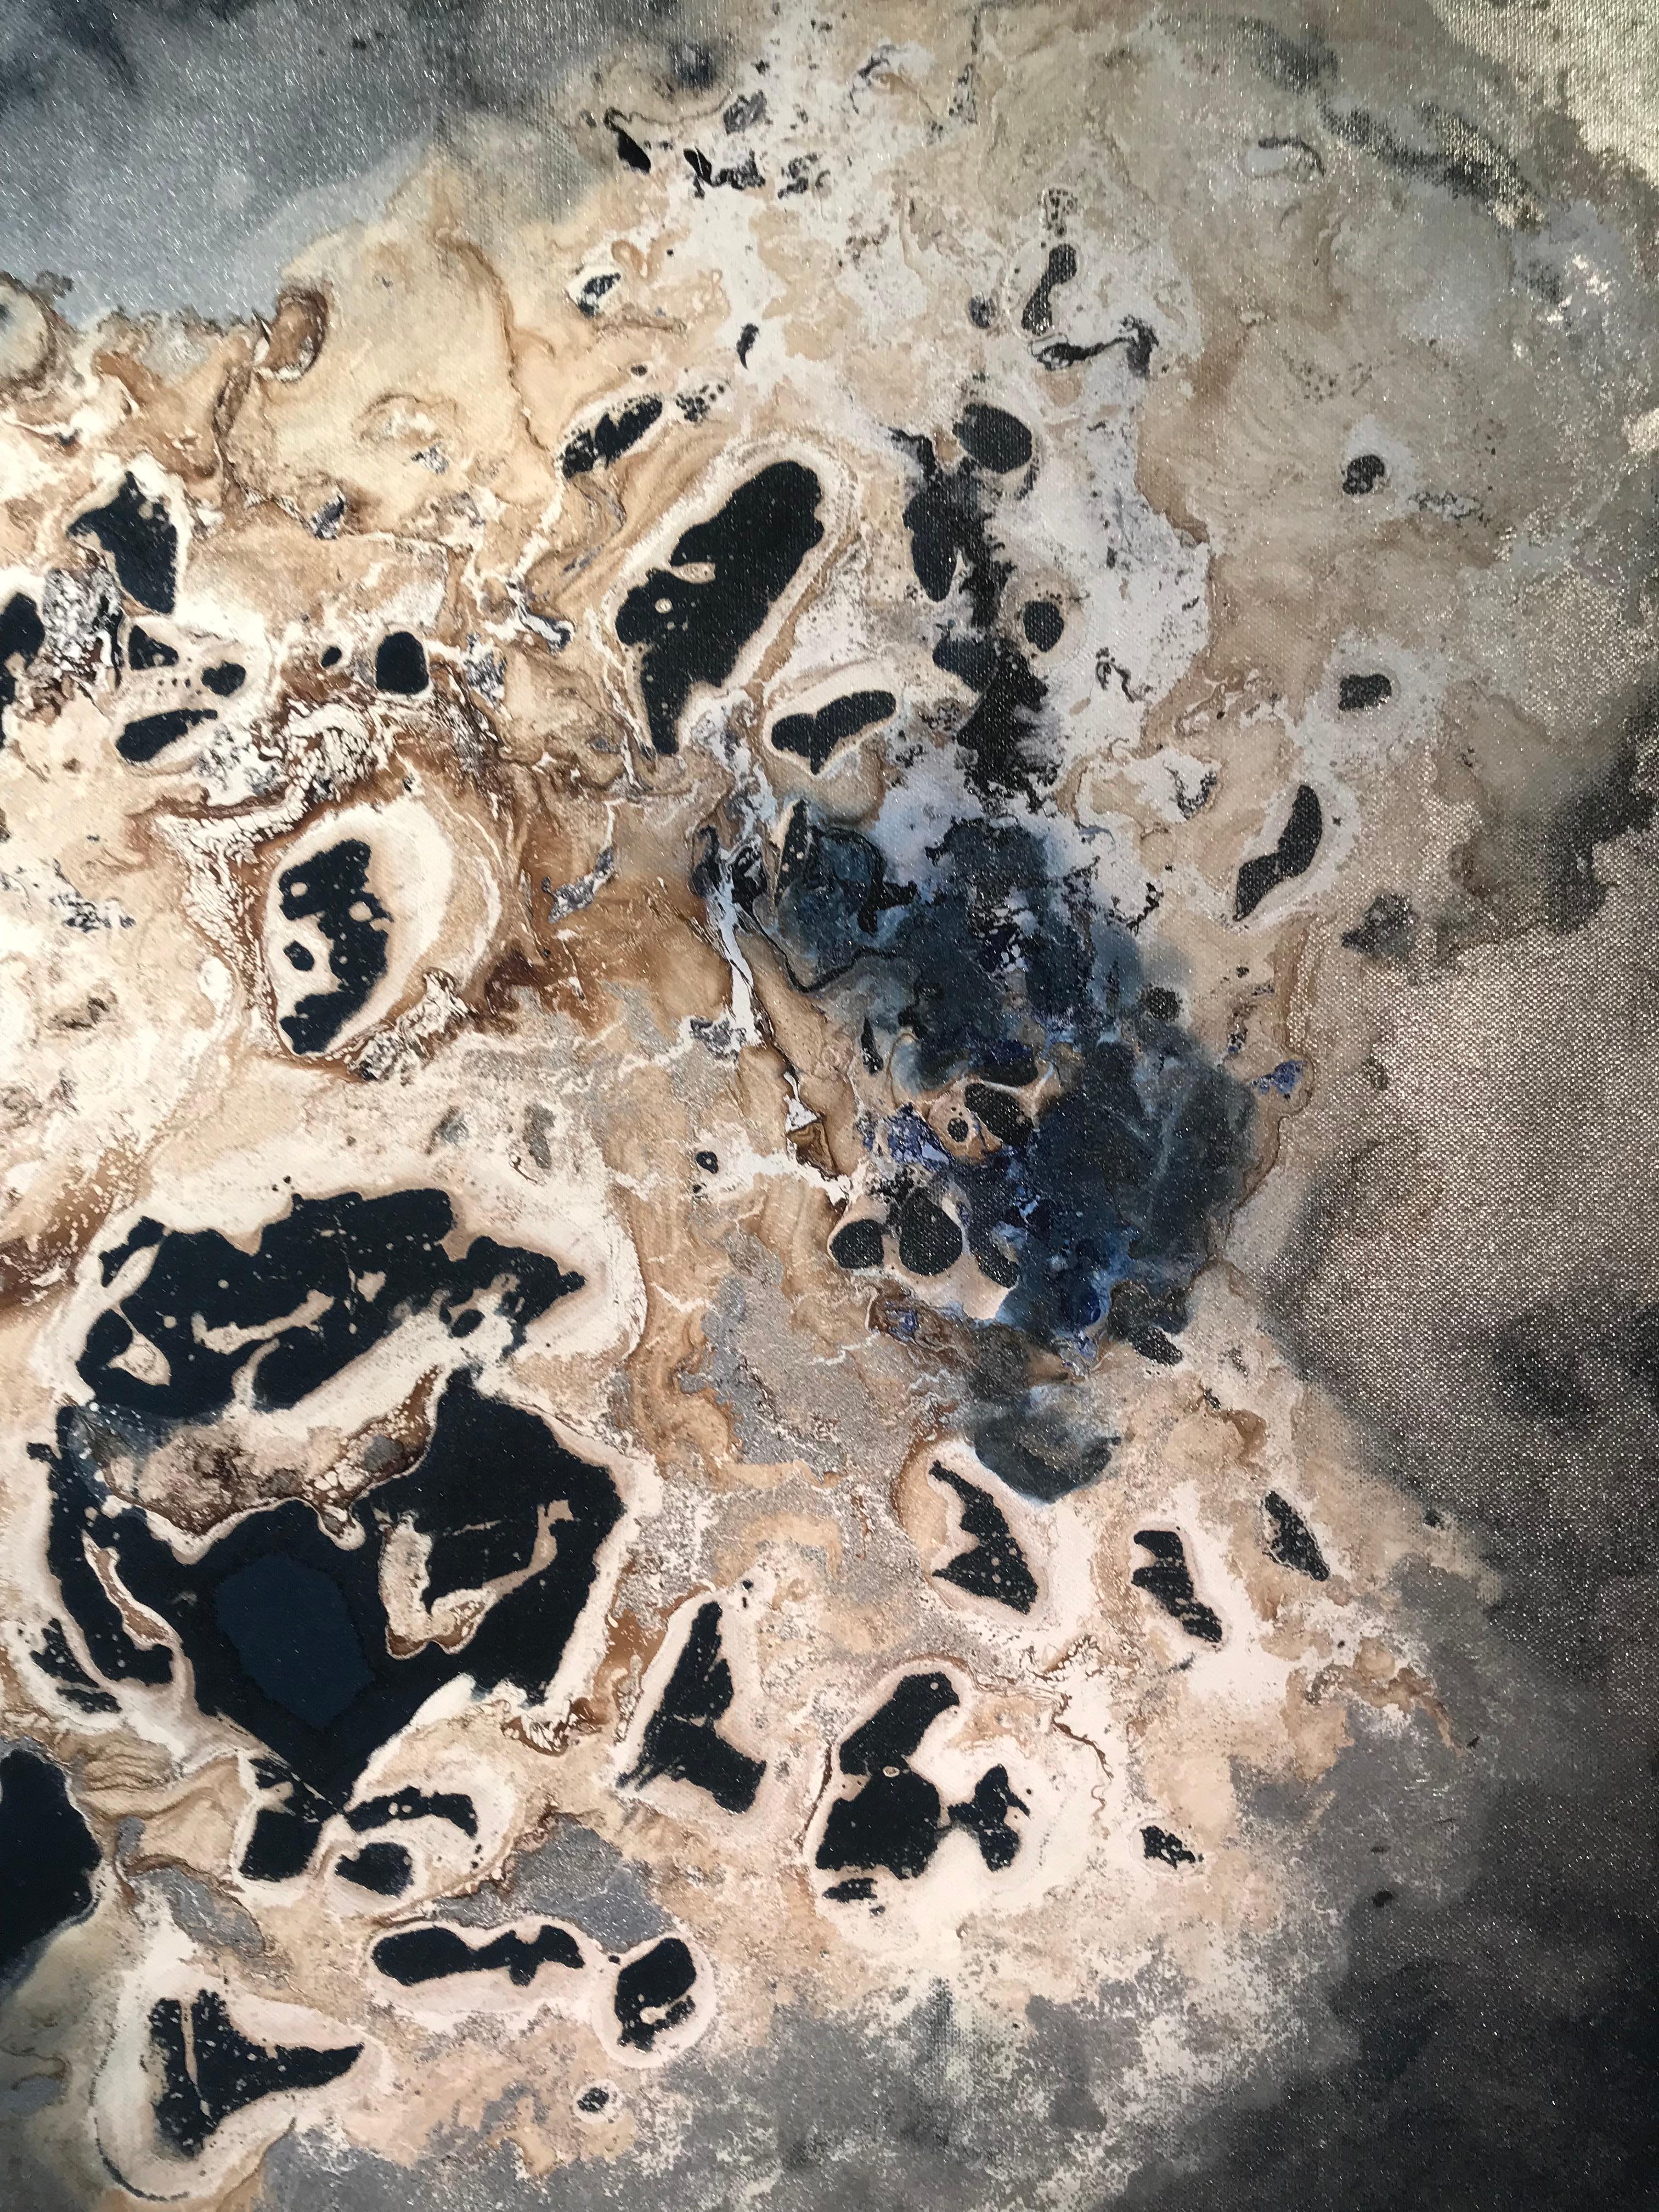 'Geode' by Kevin Burton is a mixed media contemporary abstract painting. Silver and gold create a atmospheric and interesting composition. The dark blue undertones make the piece strong and bold. 

The use of mixed media is visually interesting and